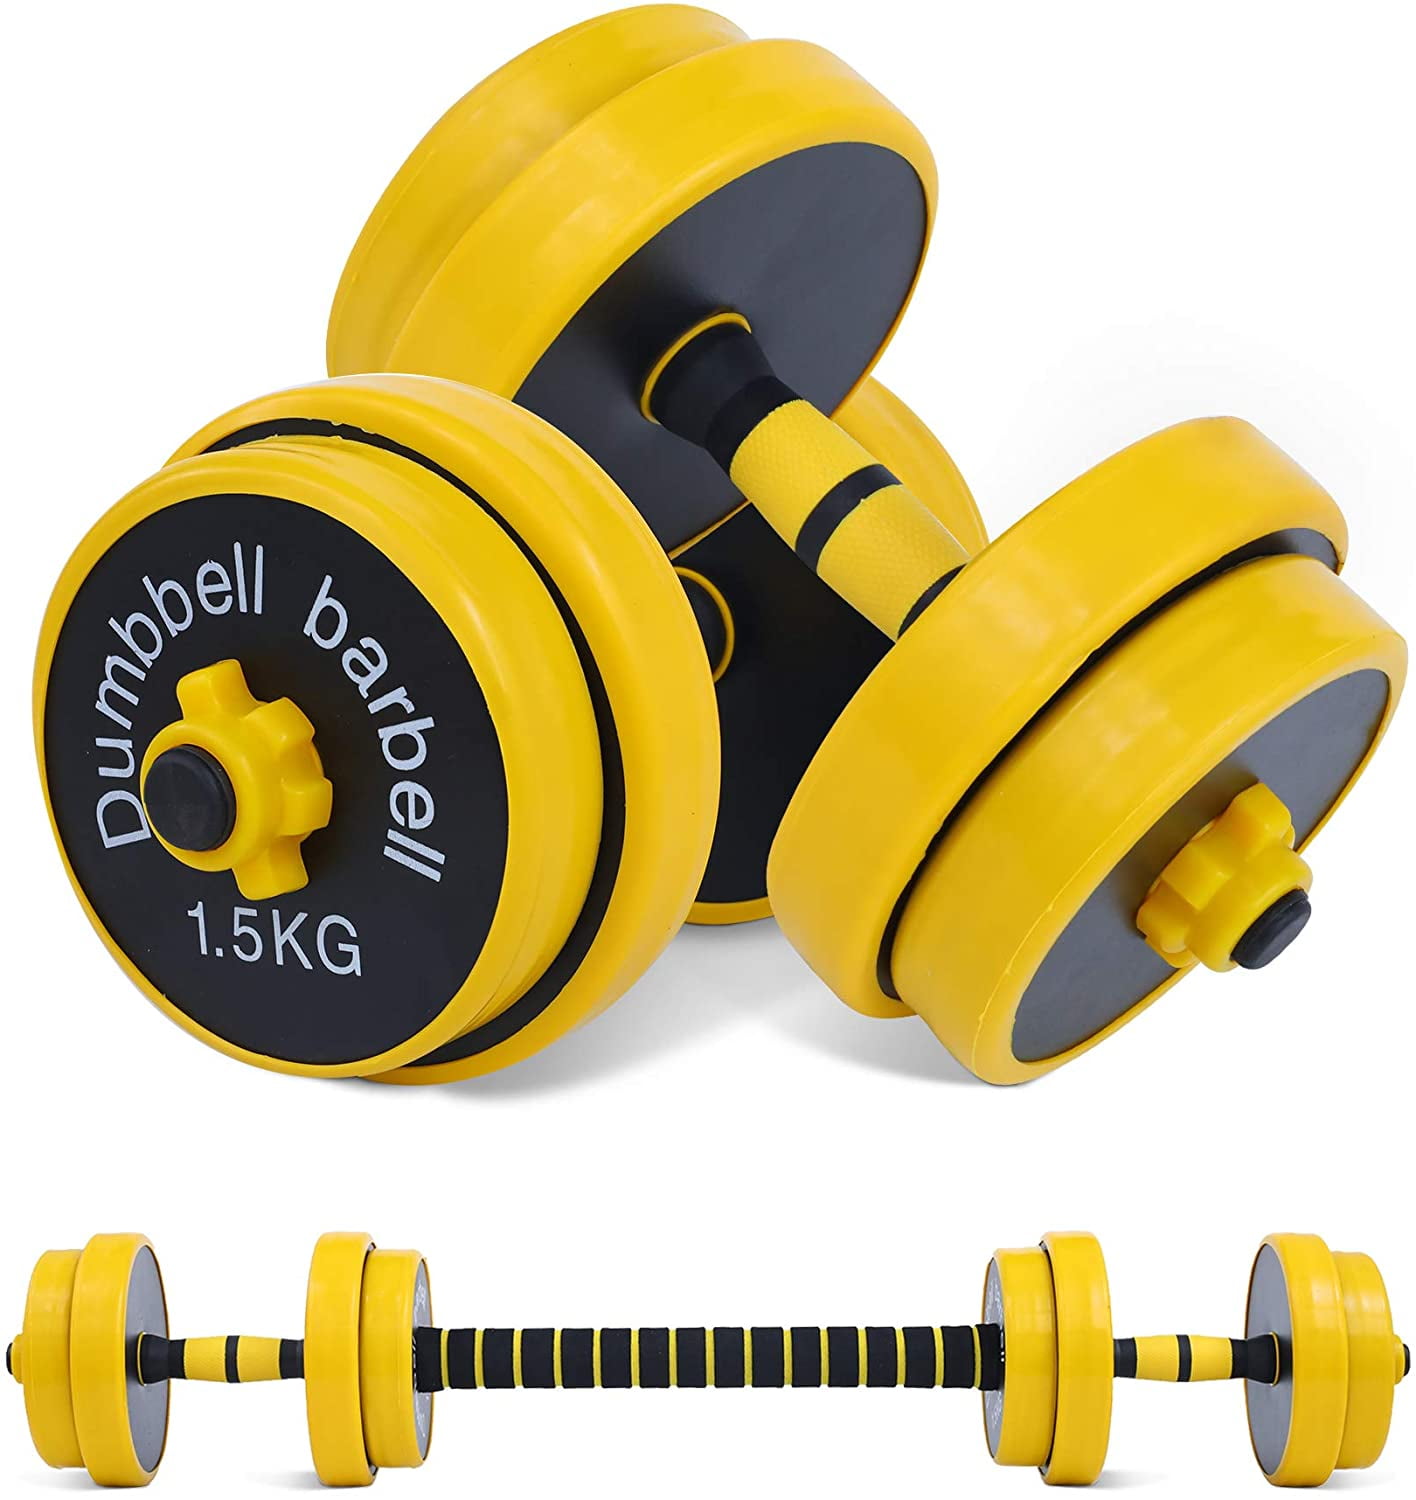 Details about   Adjustable Dumbbell Fitness Set 66 Lbs Plates Exercise Muscle Building Barbells 